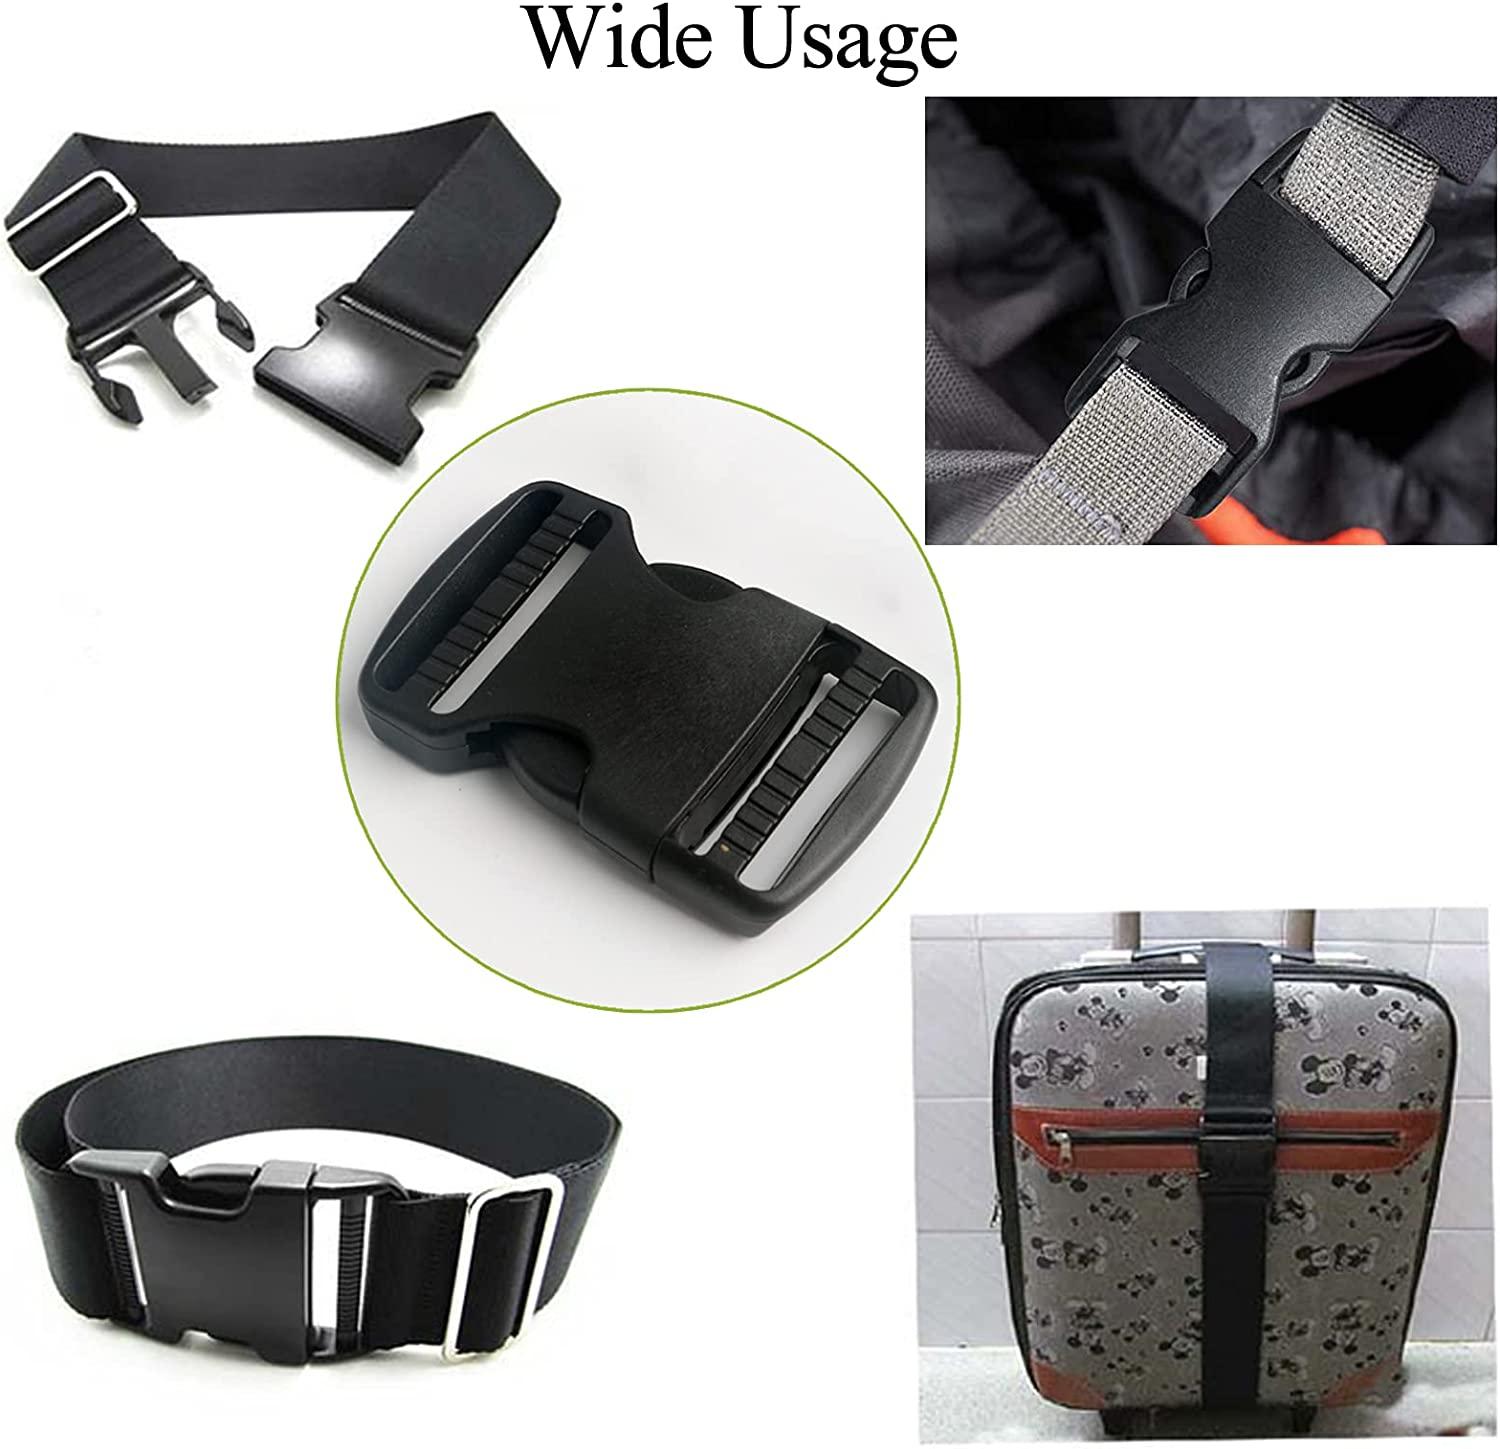 Safety buckles for collars